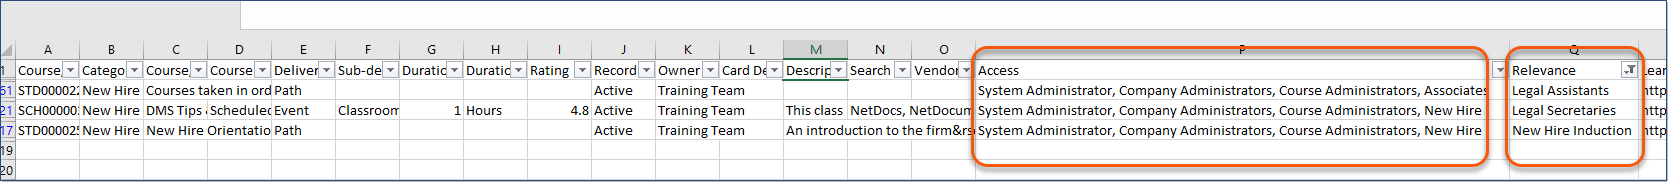 Make use of filters to filter out default settings and display the courses/paths with Access or Relevance applied.